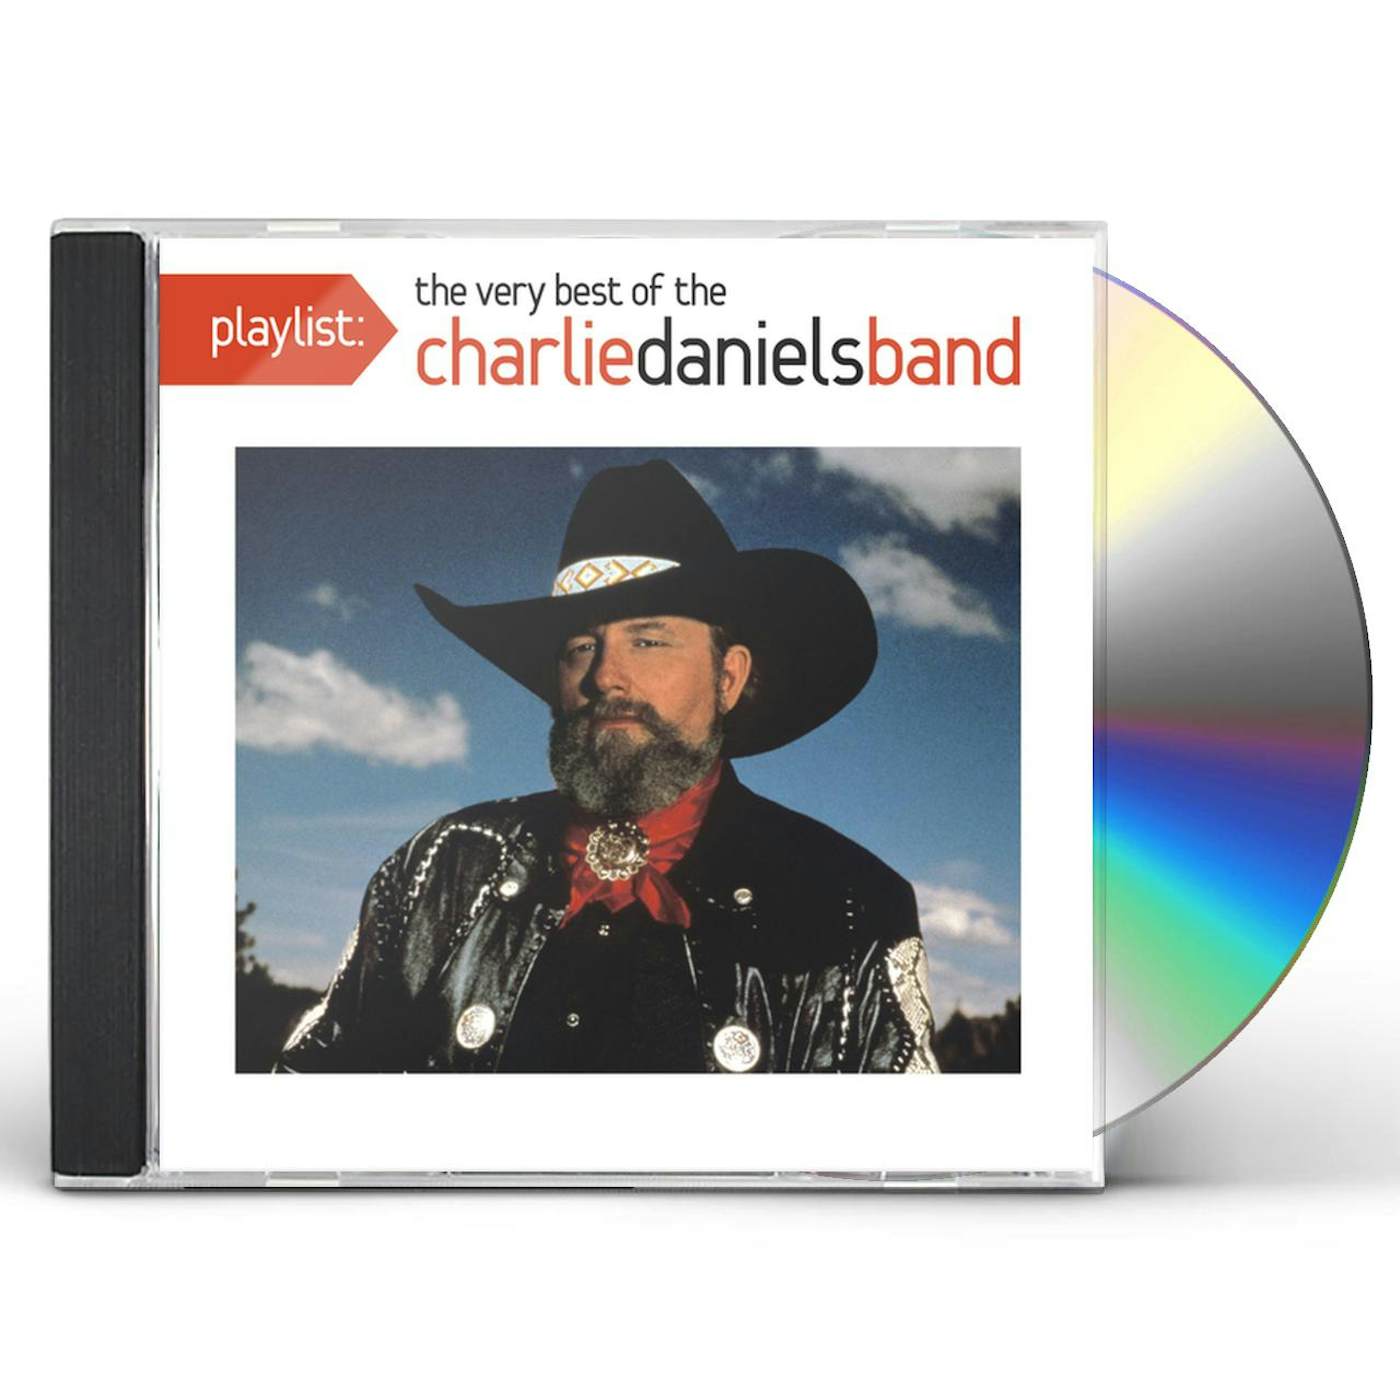 PLAYLIST: THE VERY BEST OF THE CHARLIE DANIELS BAN CD